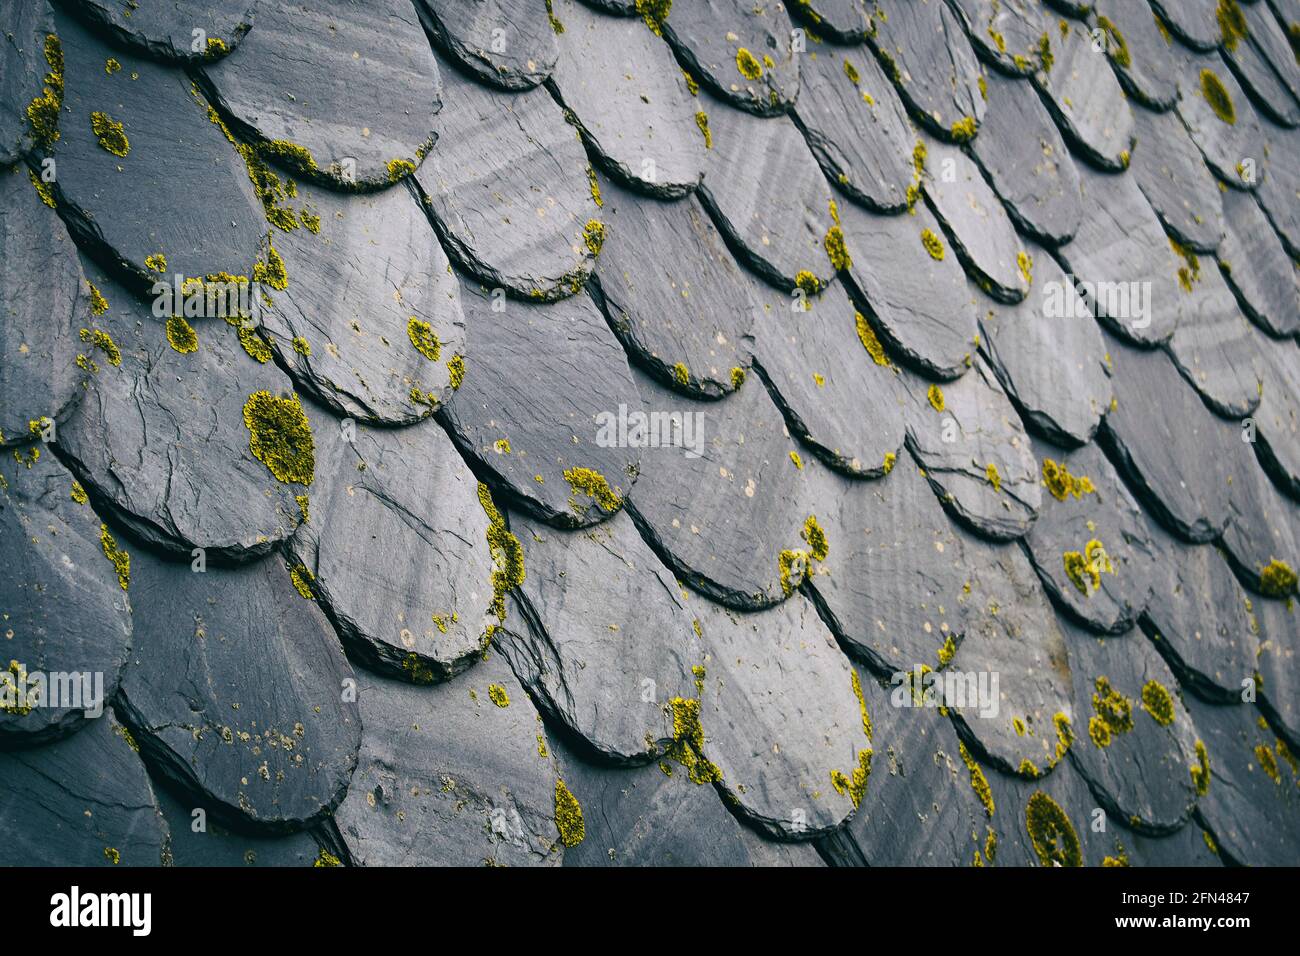 roof with old dark colored tiles, between black and gray. Create a textured pattern from an angled perspective Stock Photo